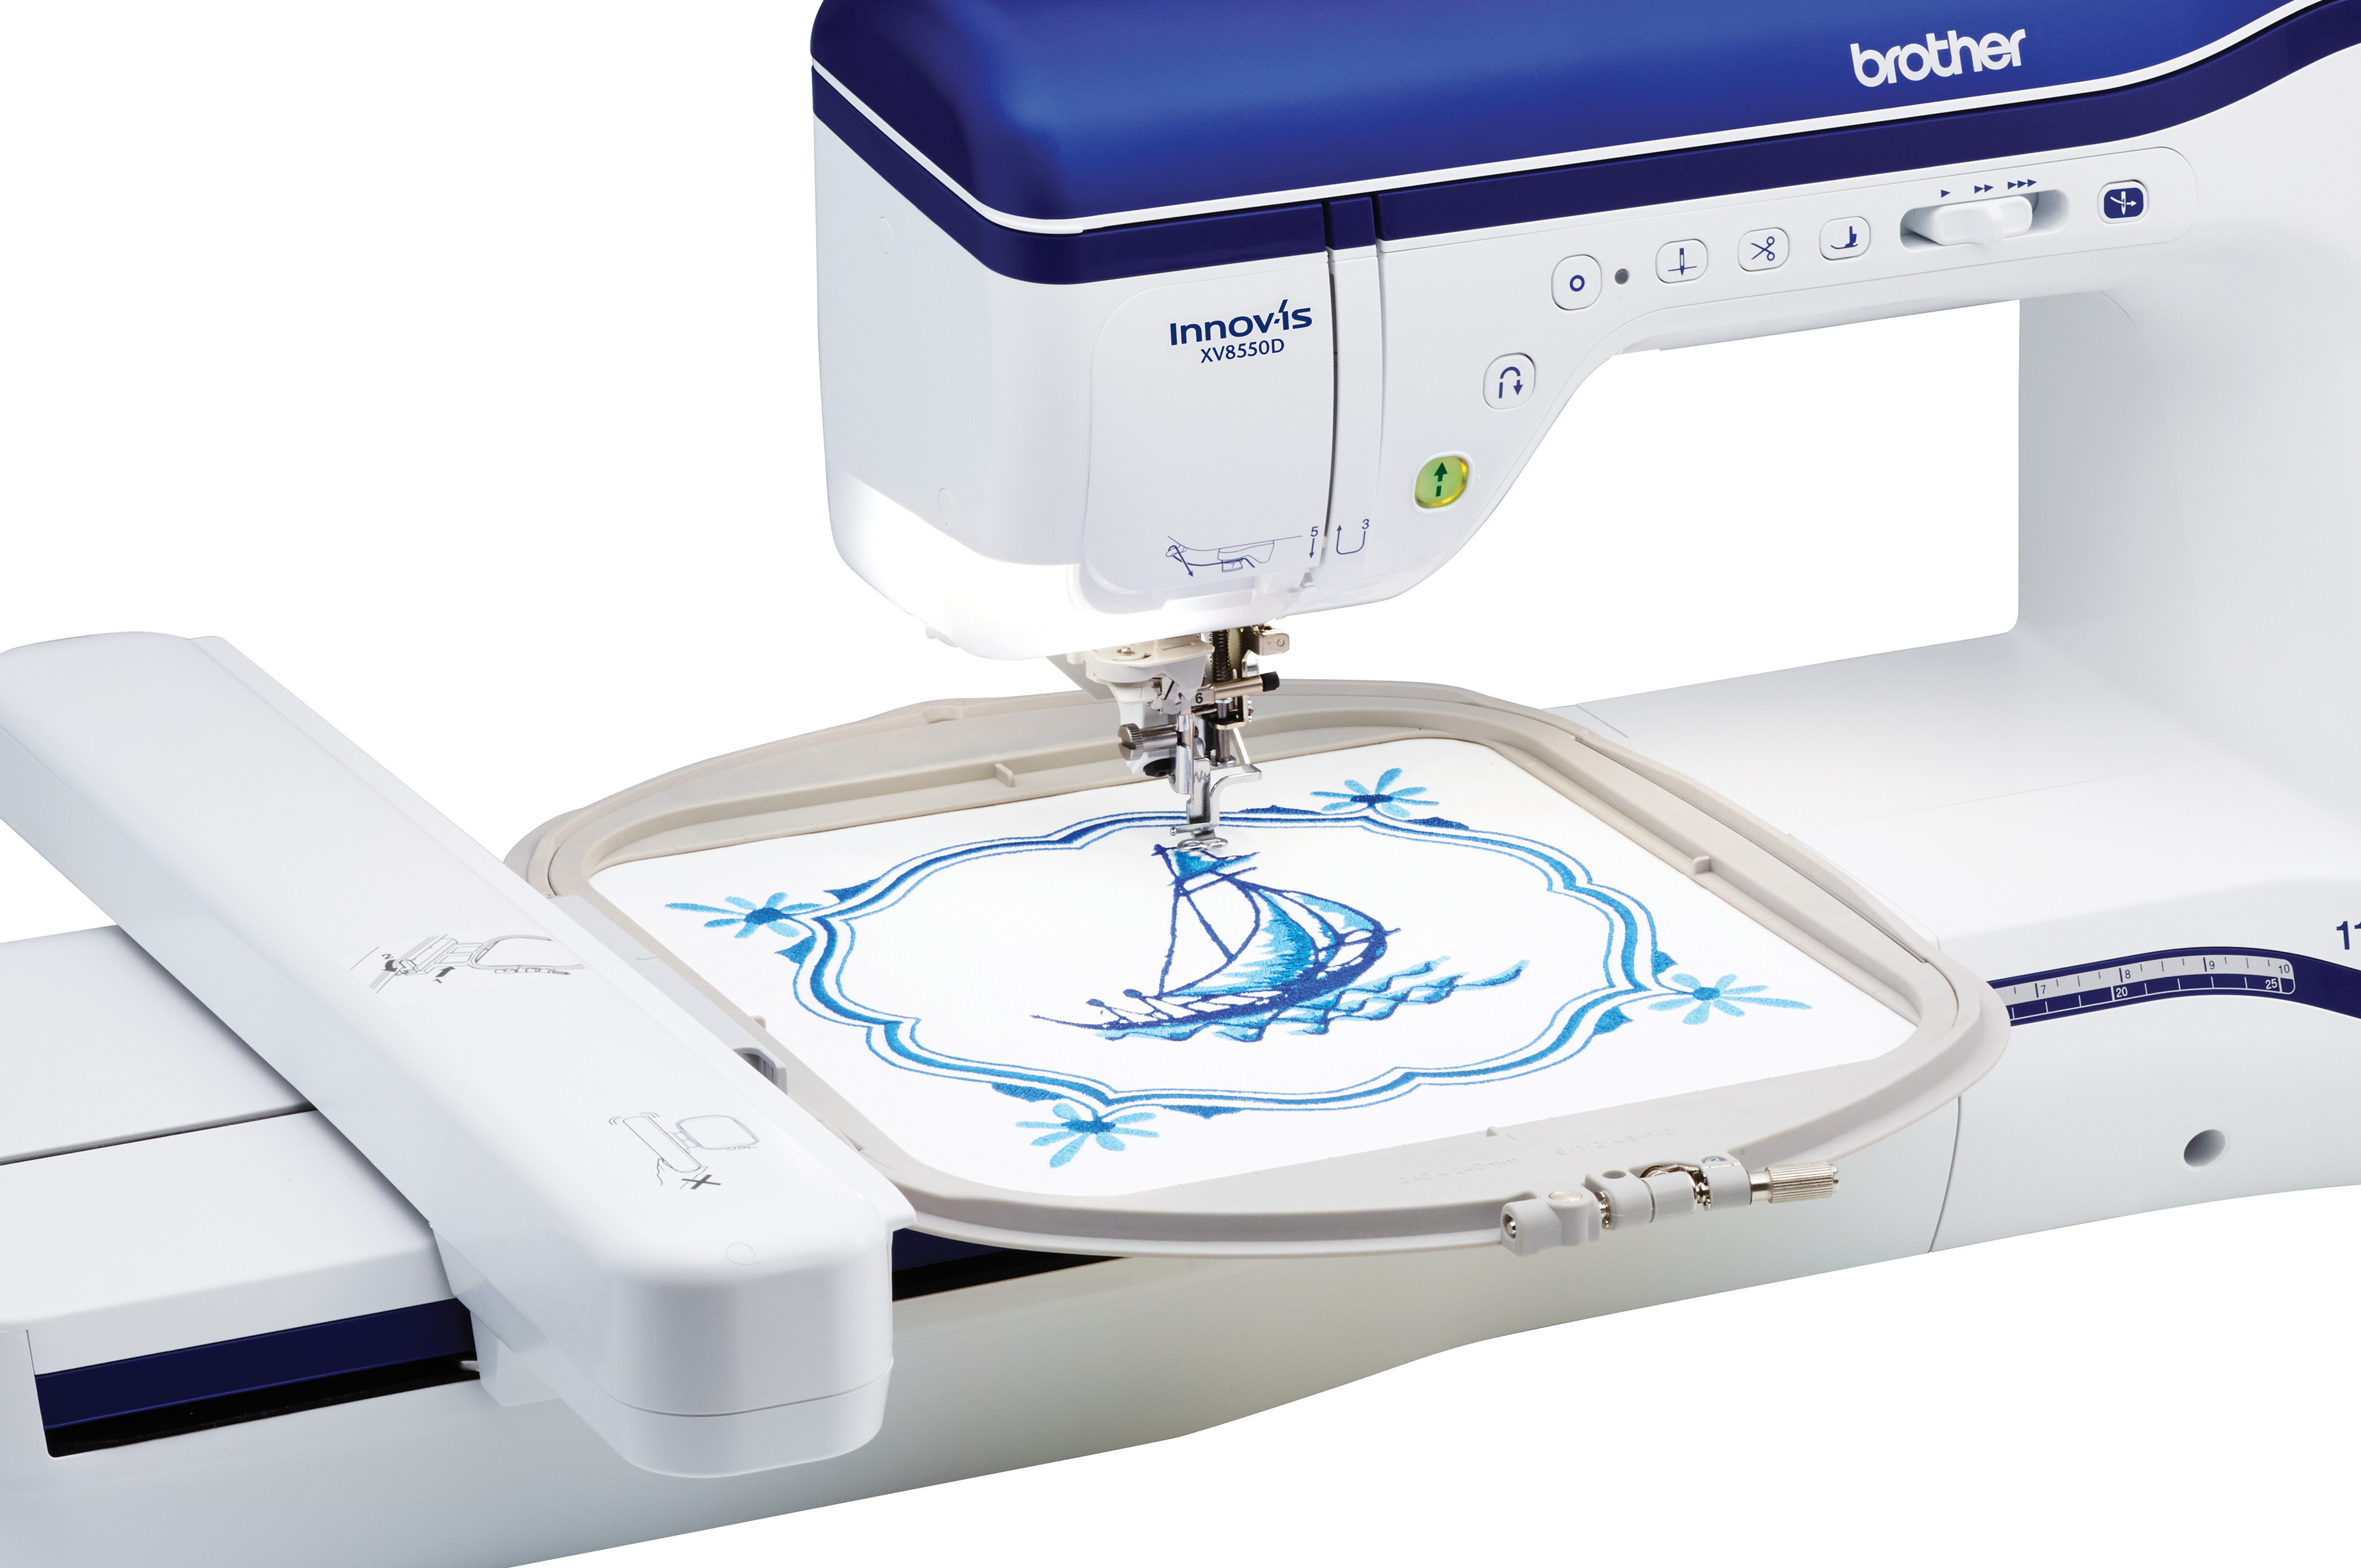 Sewing Machine Covers - The D.I.Y. Dreamer